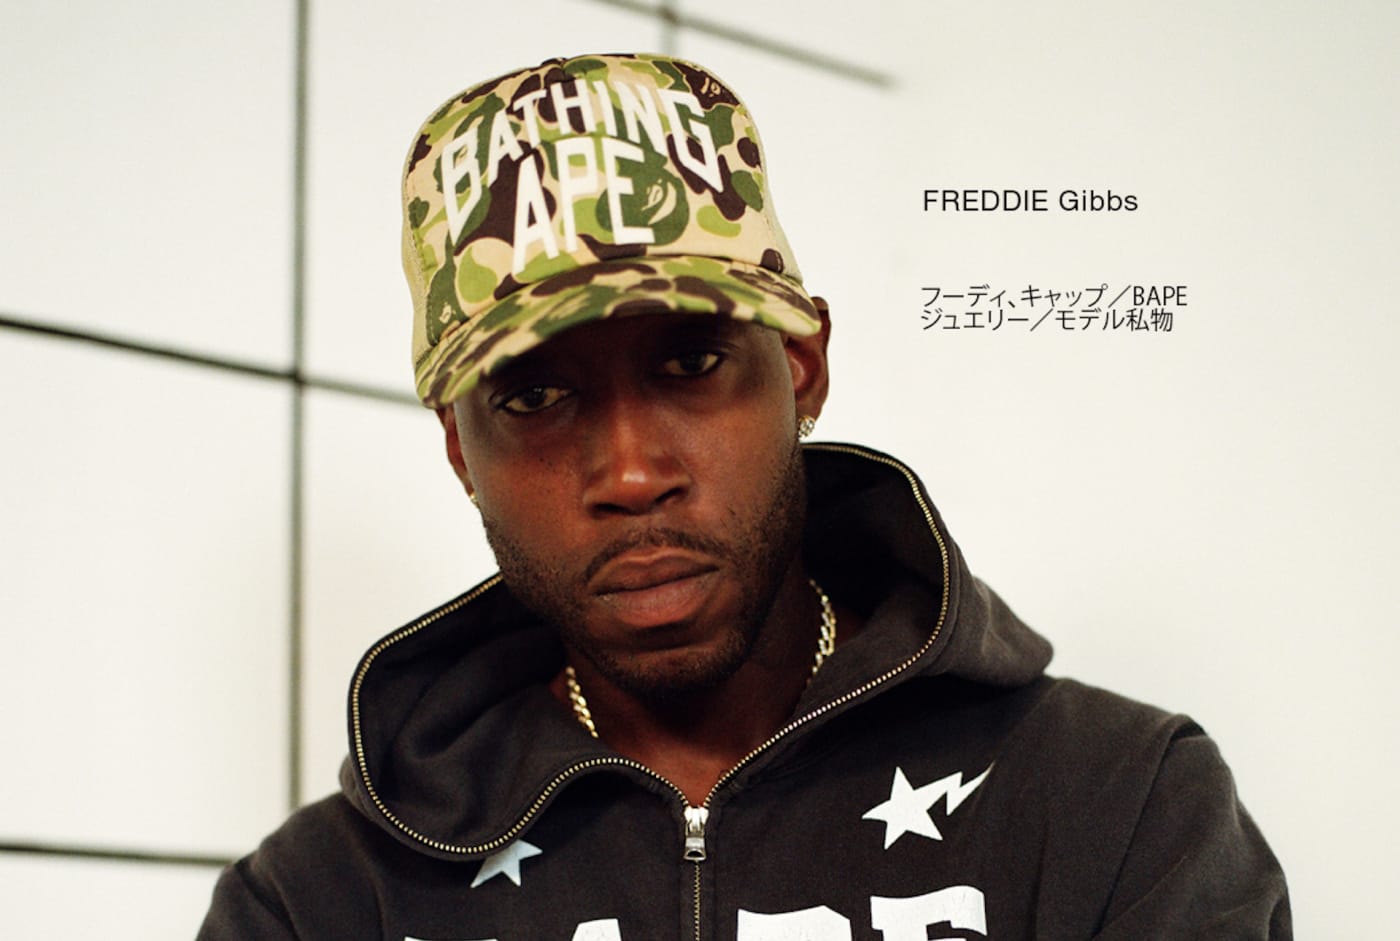 Freddie Gibbs for Adidas x BAPE and SneakersnStuff